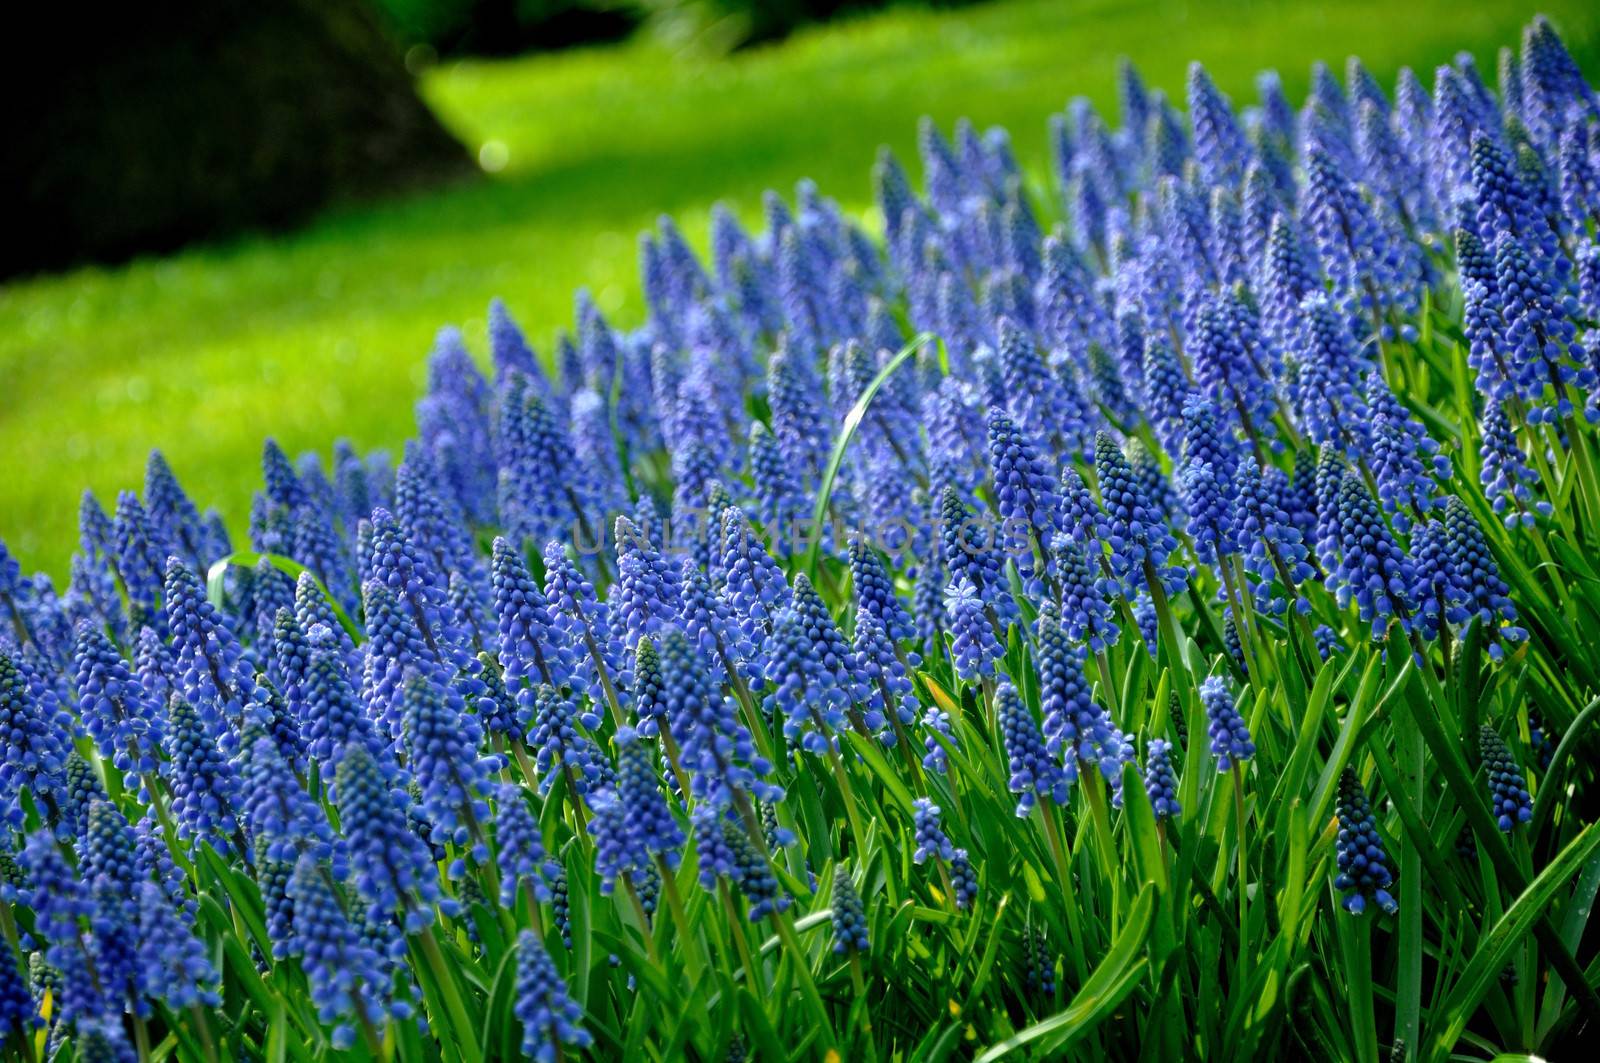 Grape Hyacinth with green grass in Keukenhof park in Holland